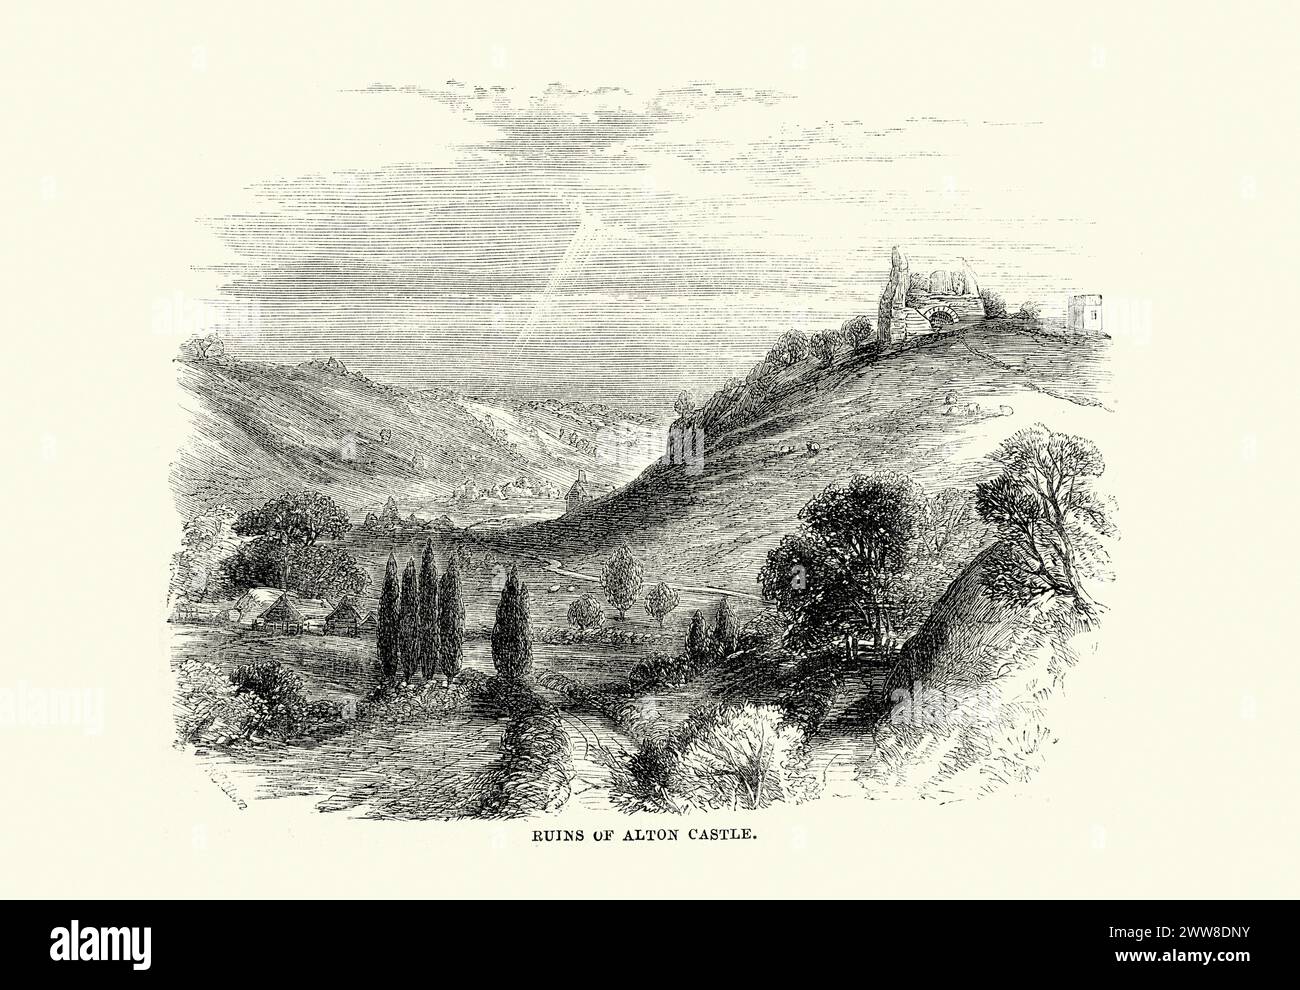 Vintage engraving of Ruins of Alton Castle, Alton Castle is a Gothic-revival castle, located on a hill above the Churnet Valley, in the village of Alton, Staffordshire. The site has been fortified since Saxon times, with the original castle dating from the 12th-century. 1869 Stock Photo